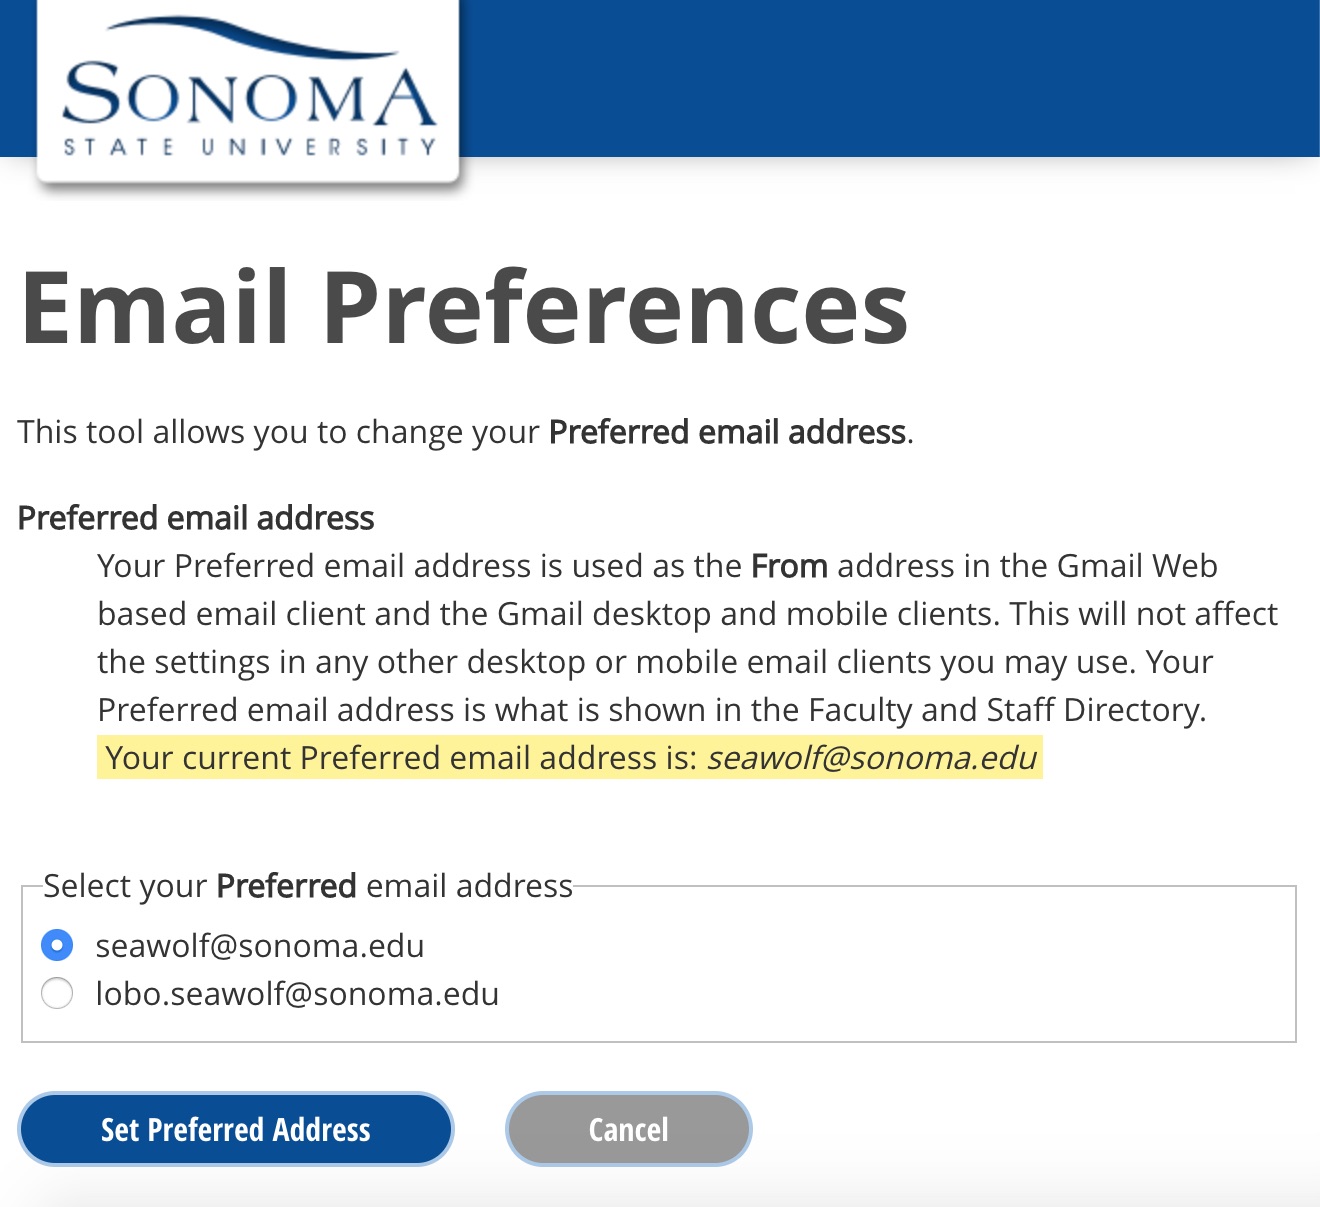 Screenshot of the Email Preferences tool